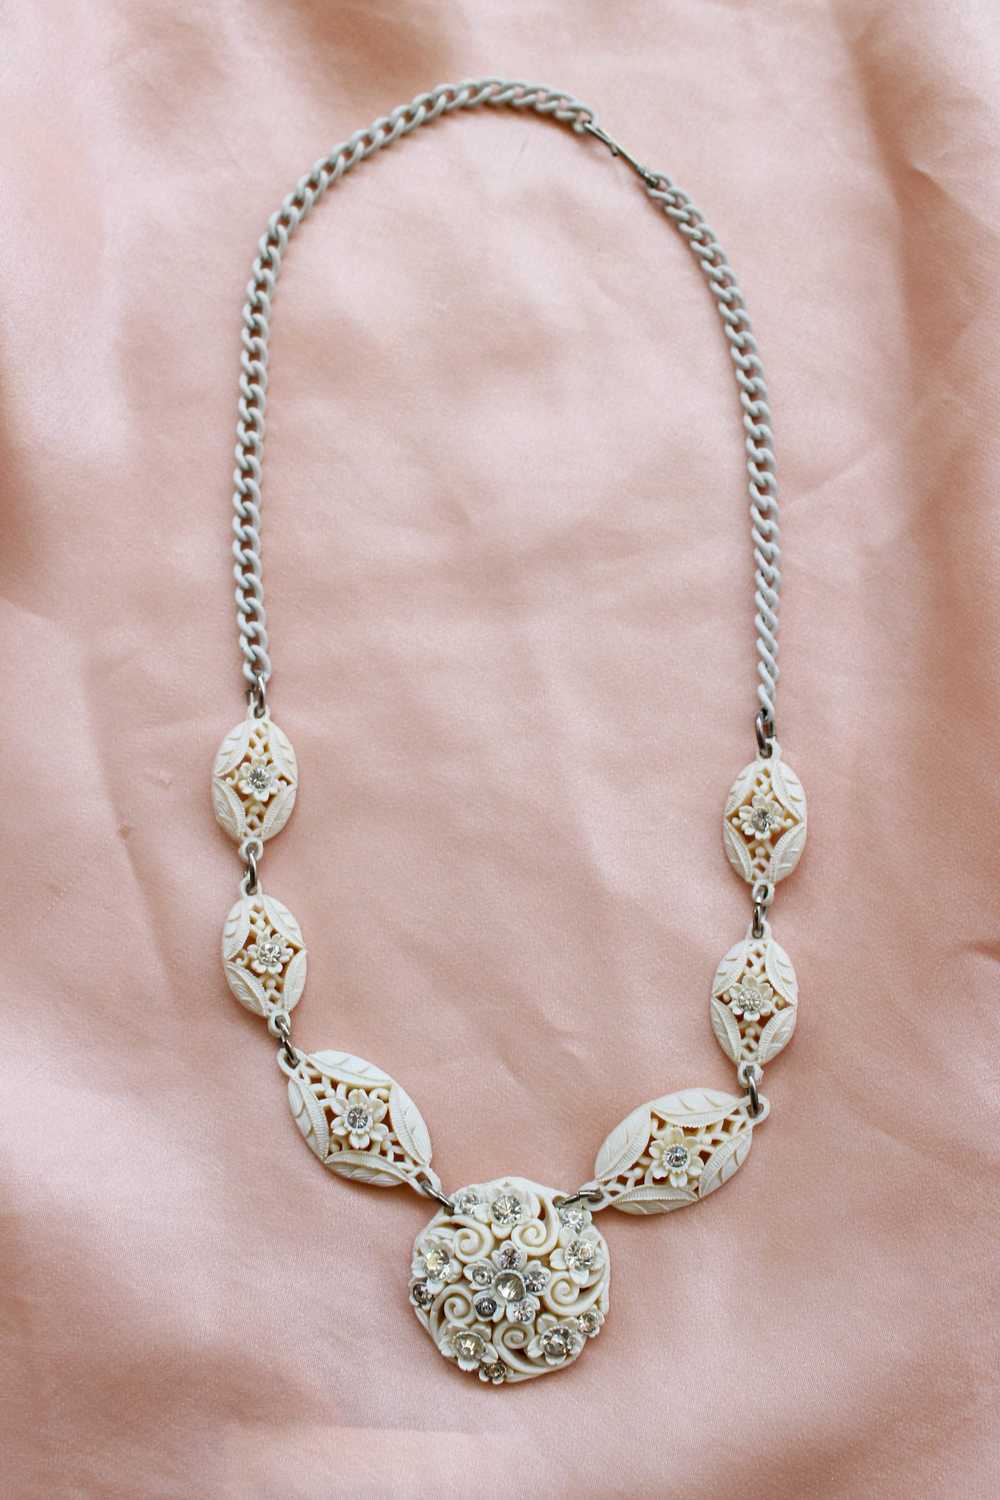 1950s White Carved Celluloid Rhinestone Necklace - image 1